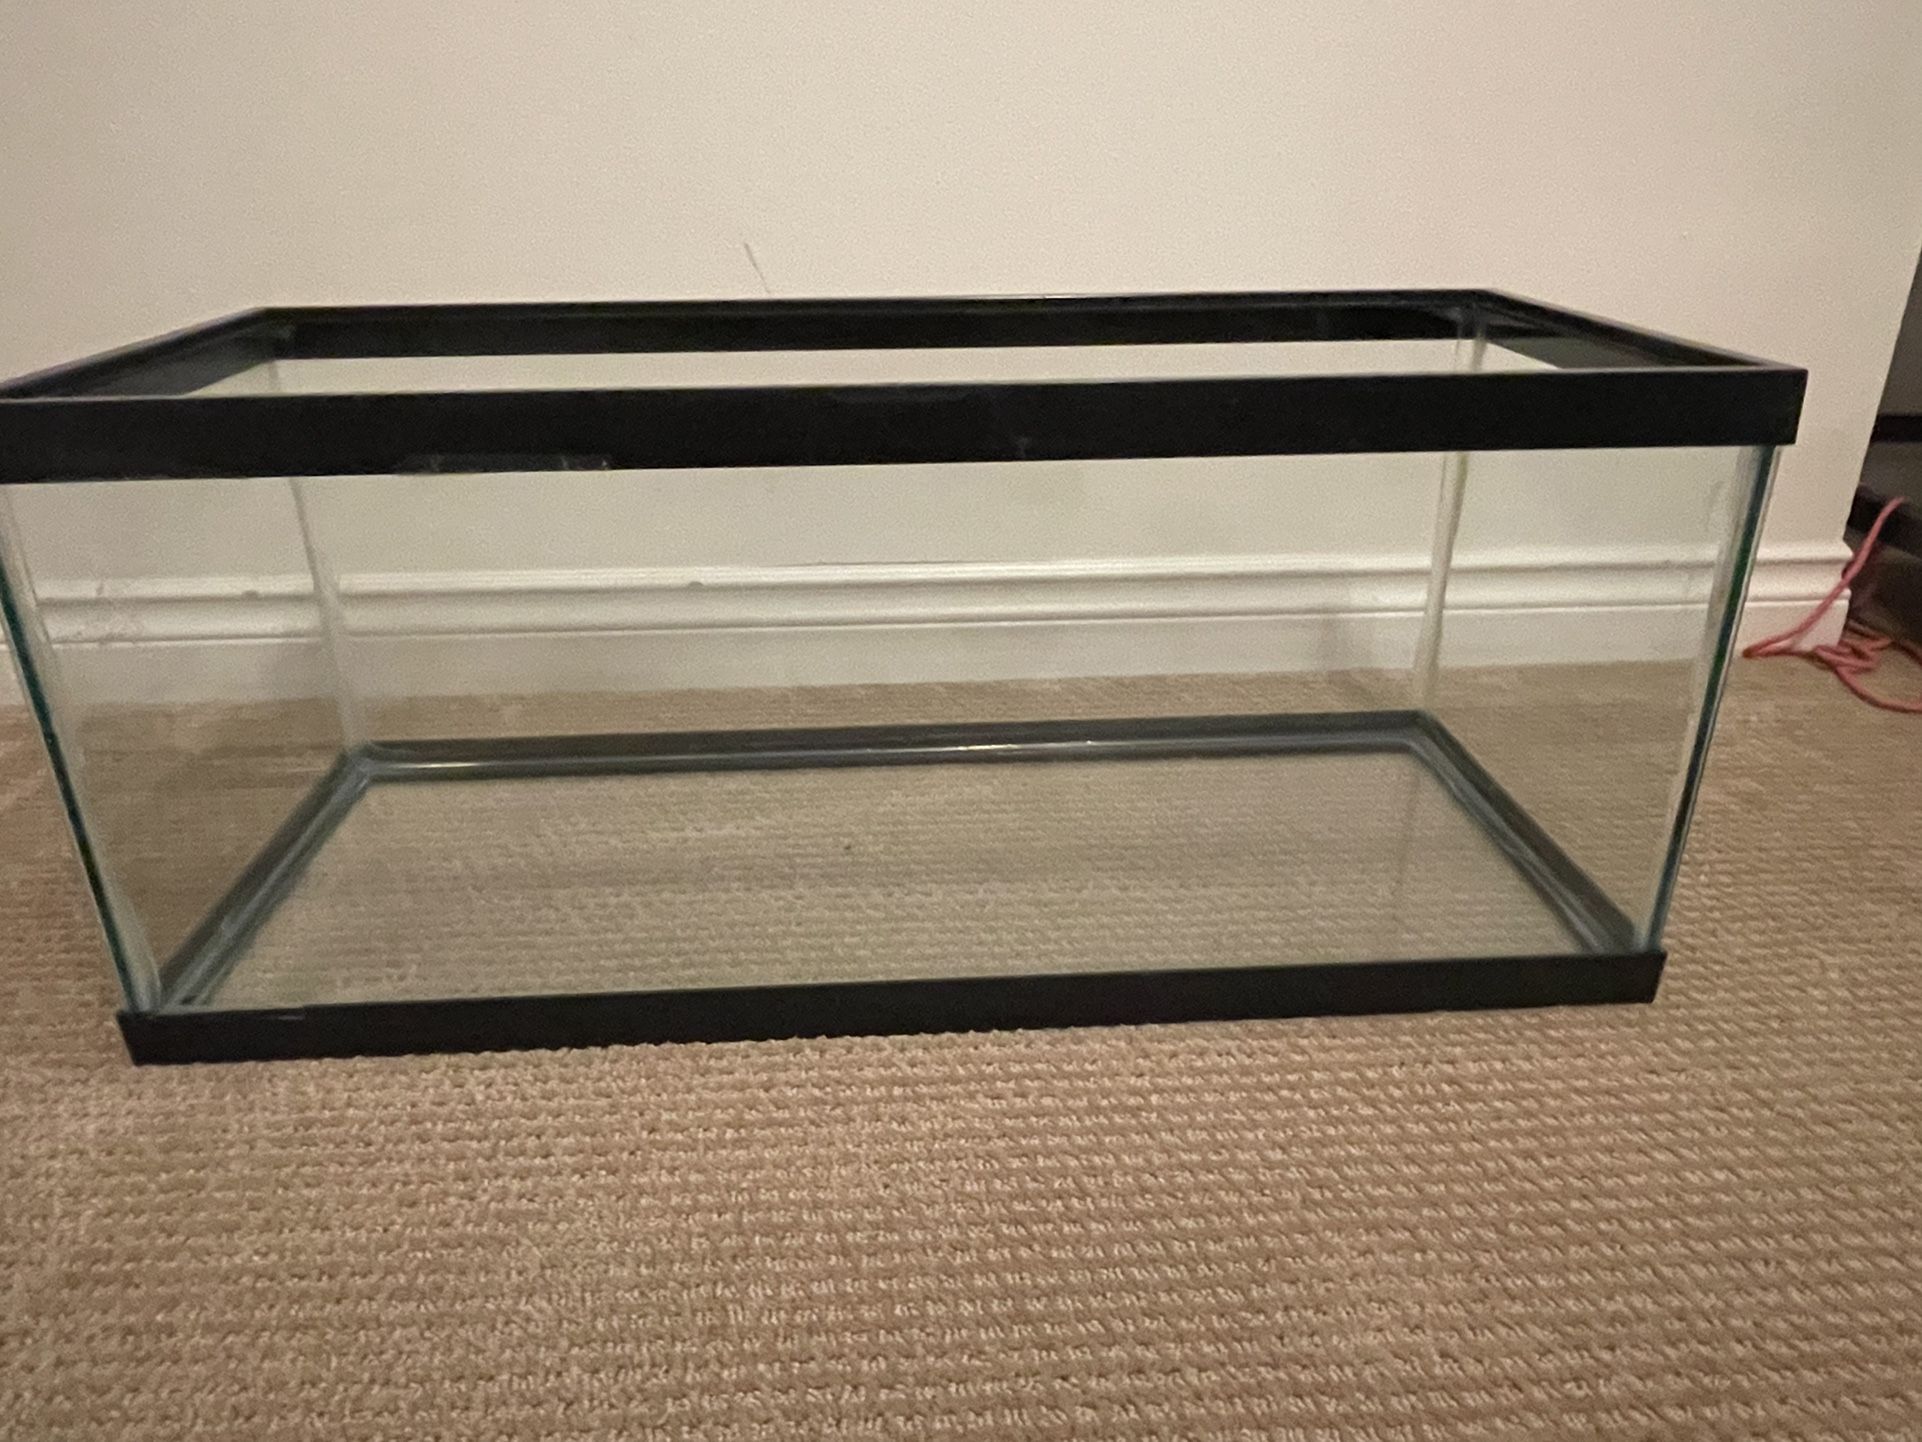 20 Gallon Fish Tank With Filter And Lid